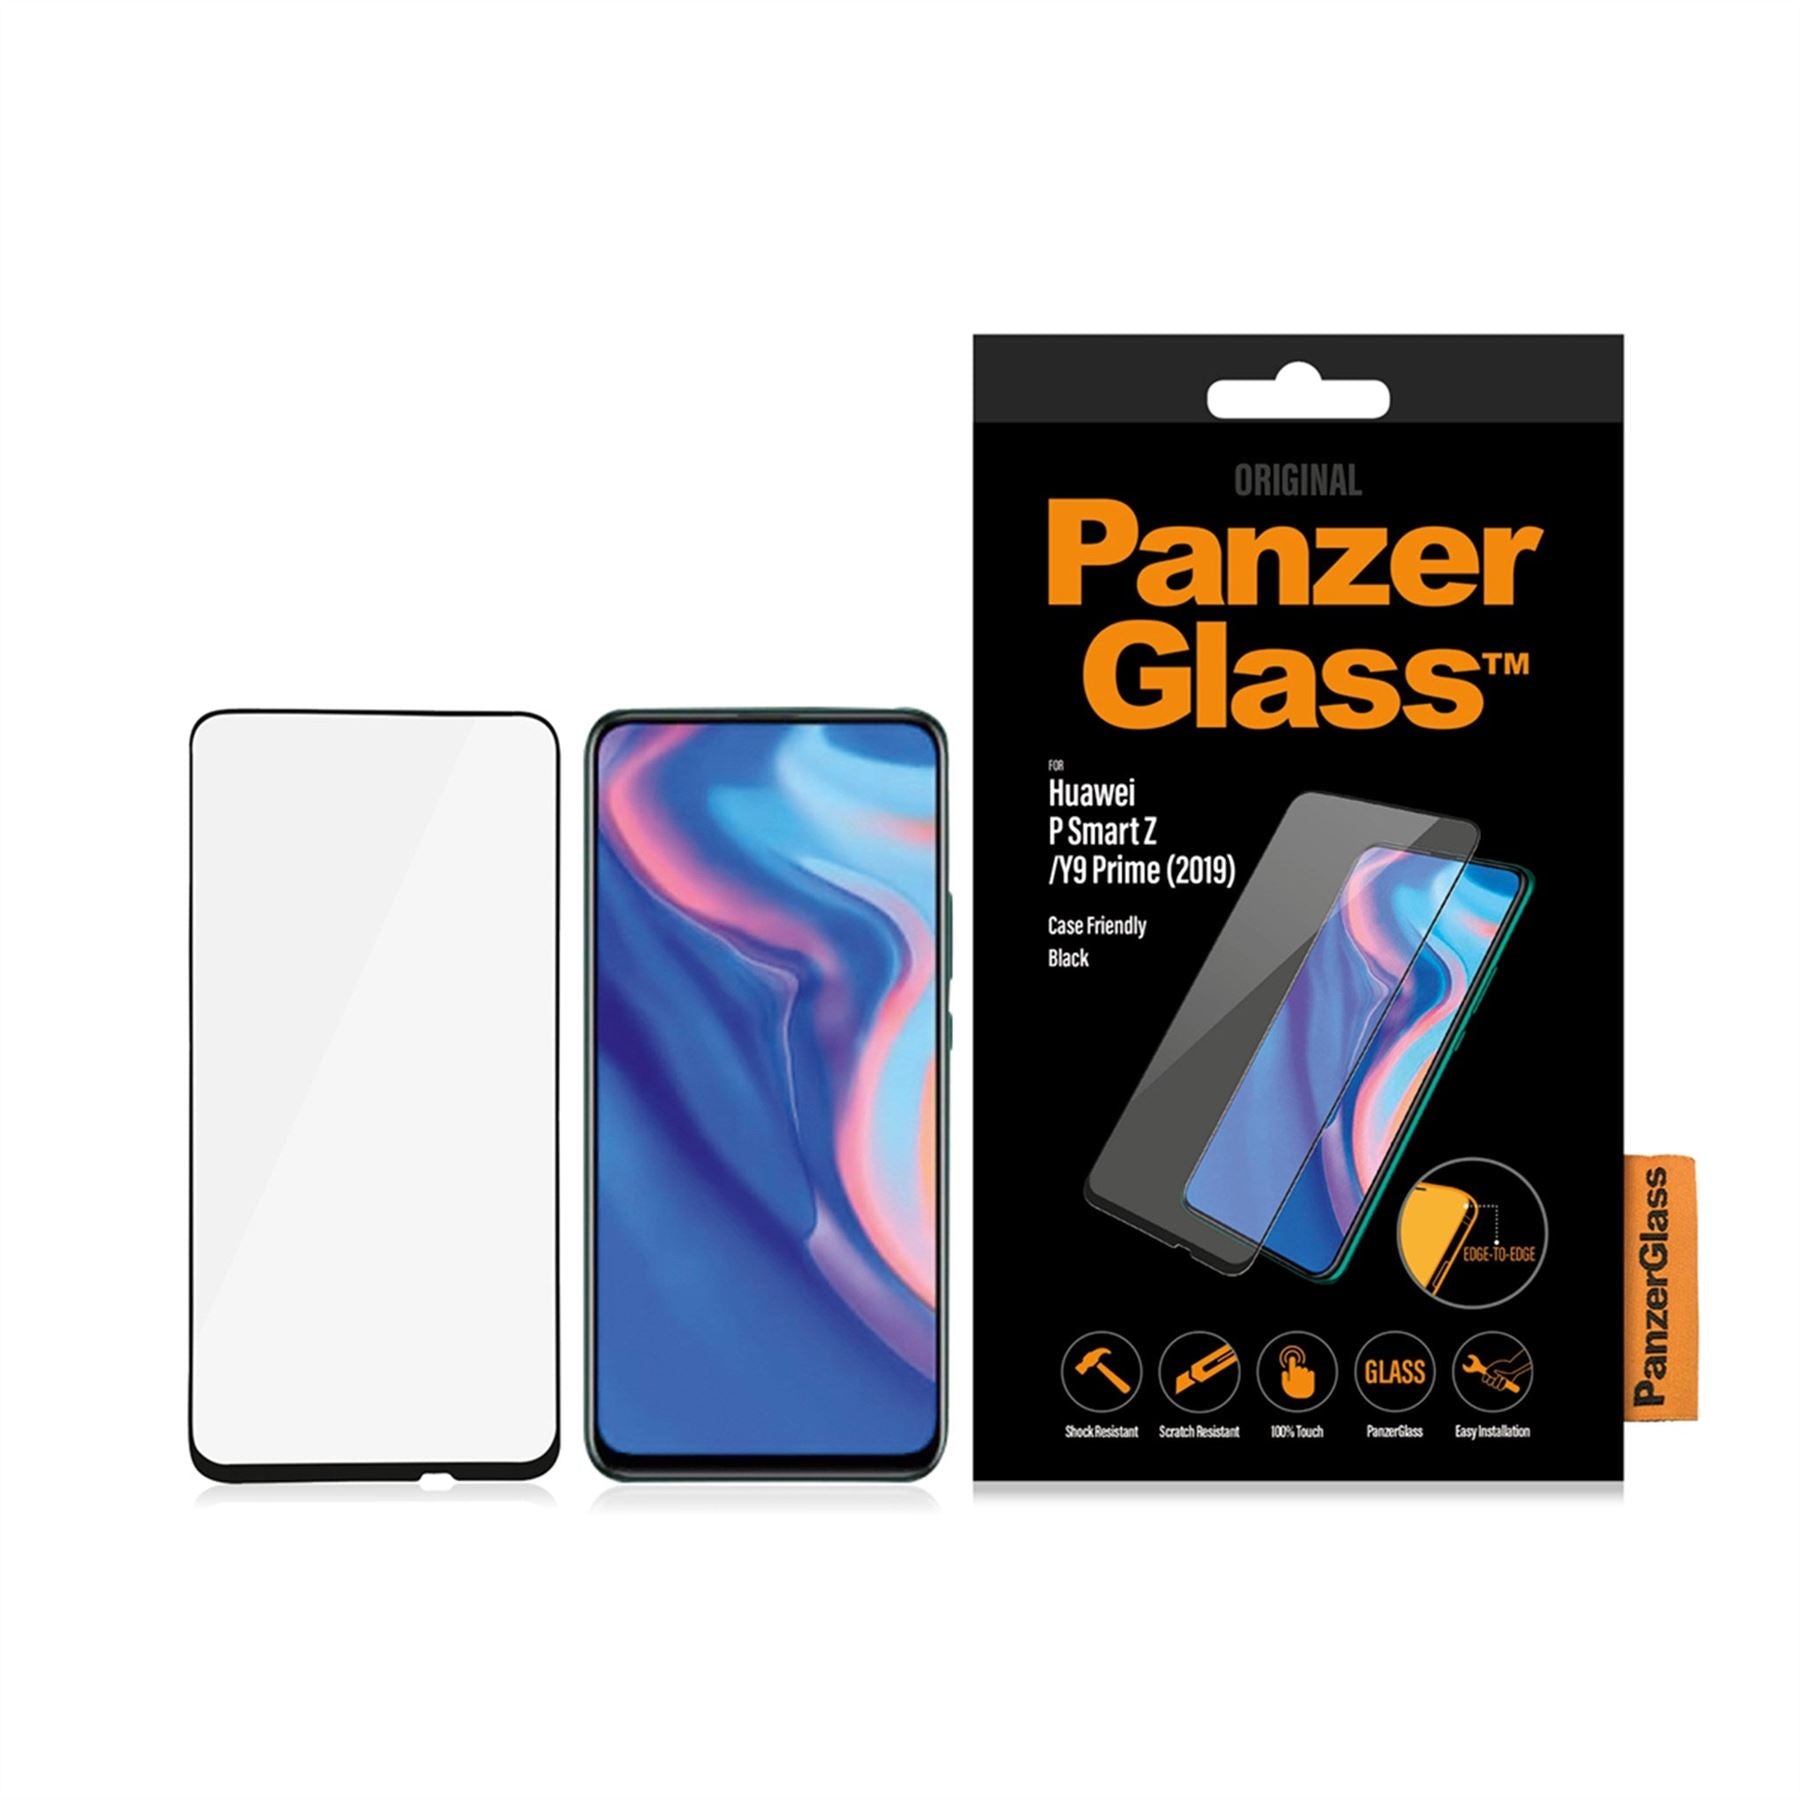 Official Panzer Glass Black for Huawei P Smart Z/Y9 Prime 2019 - PZ5350